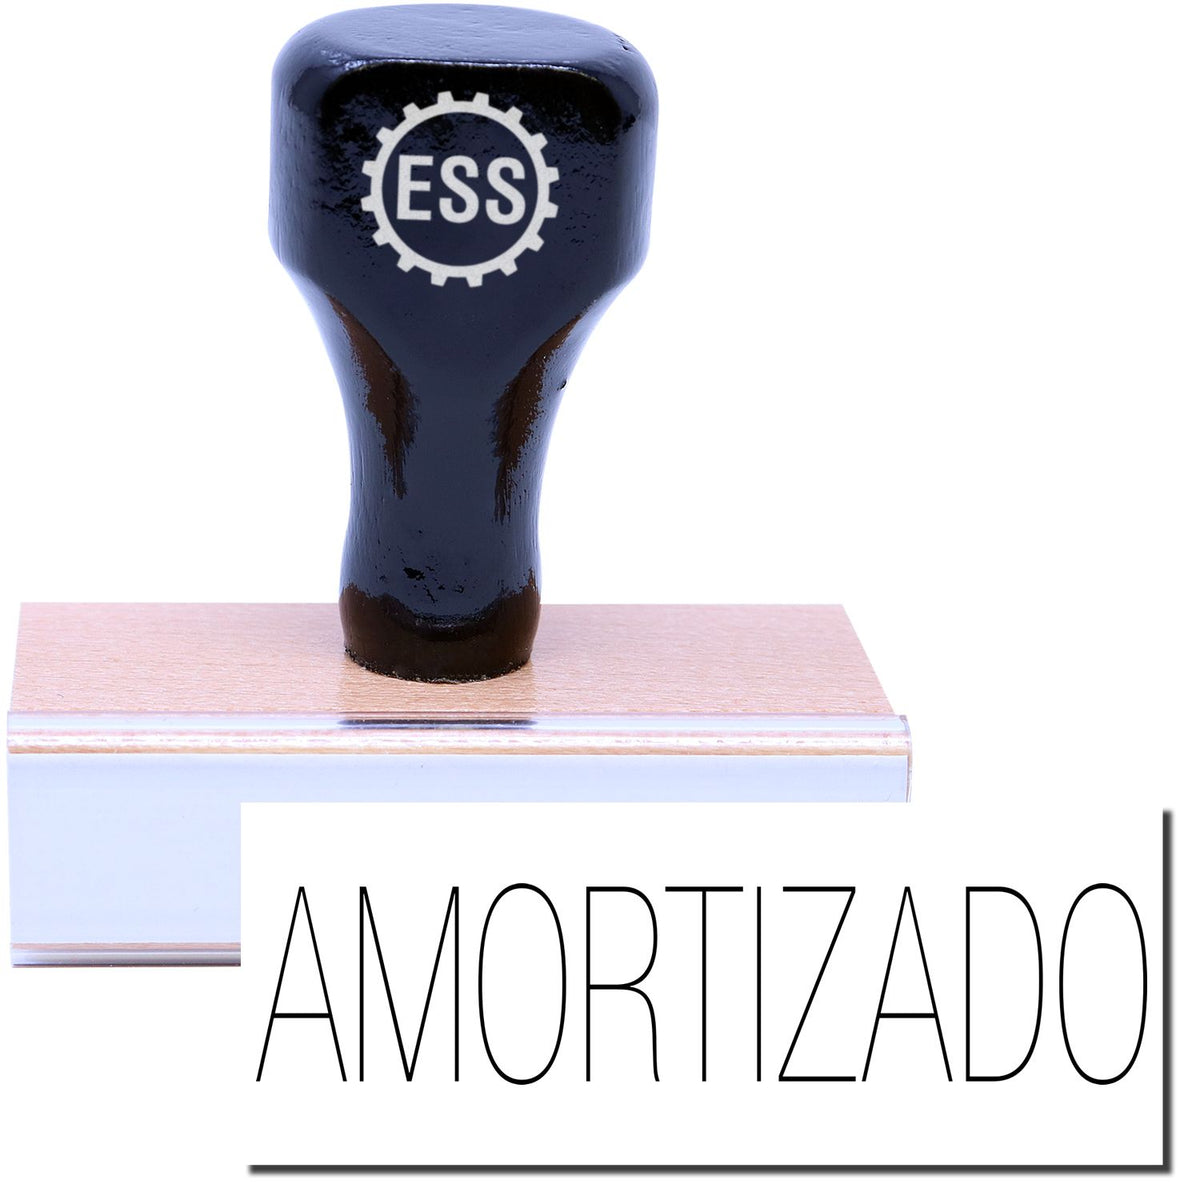 A stock office rubber stamp with a stamped image showing how the text &quot;AMORTIZADO&quot; is displayed after stamping.